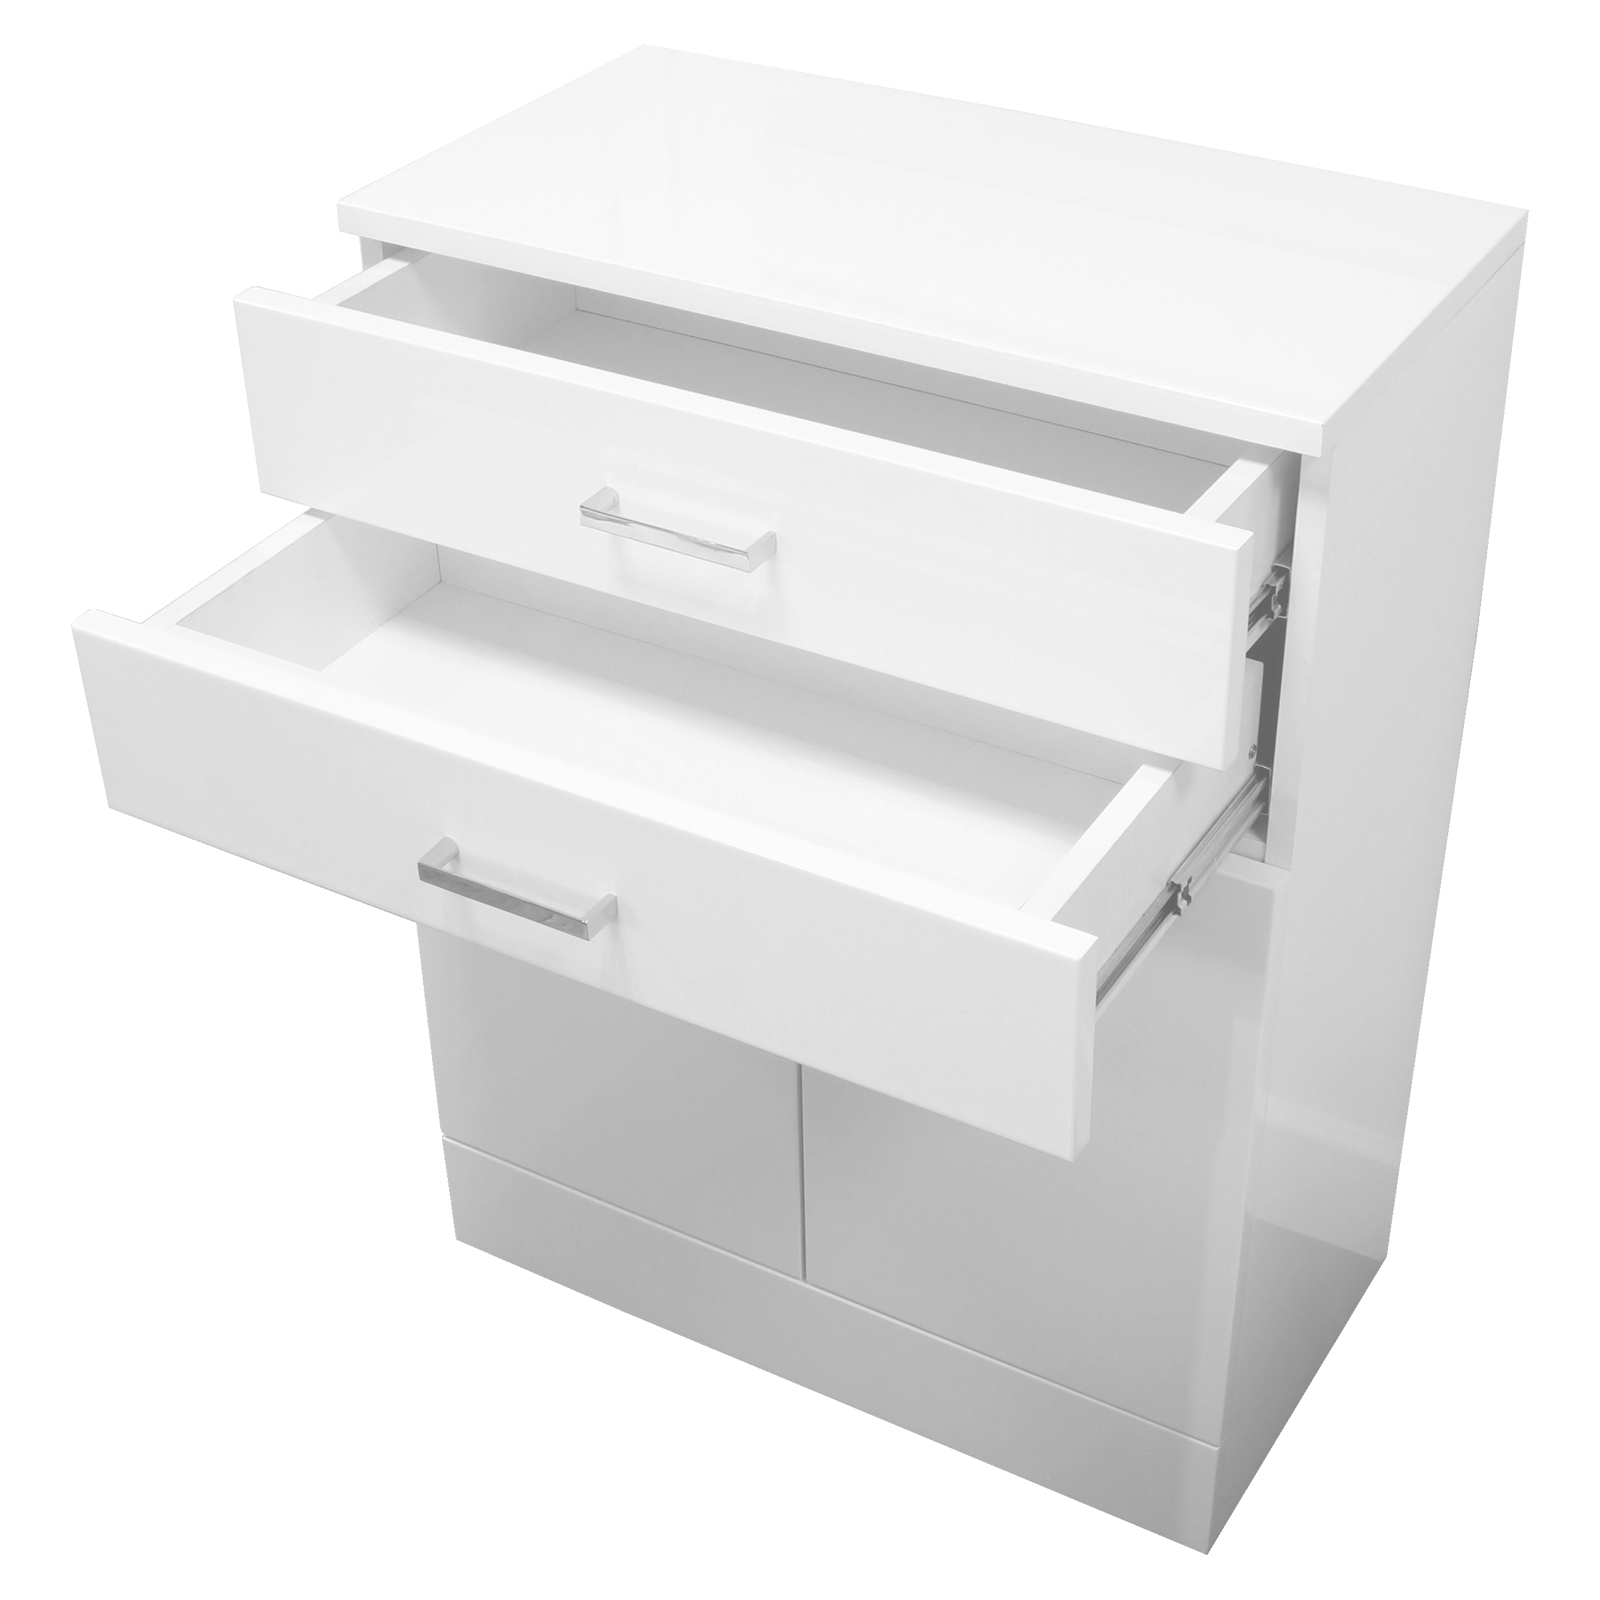 Buy High Gloss White Trento Bathroom Cabinet With Soft Close